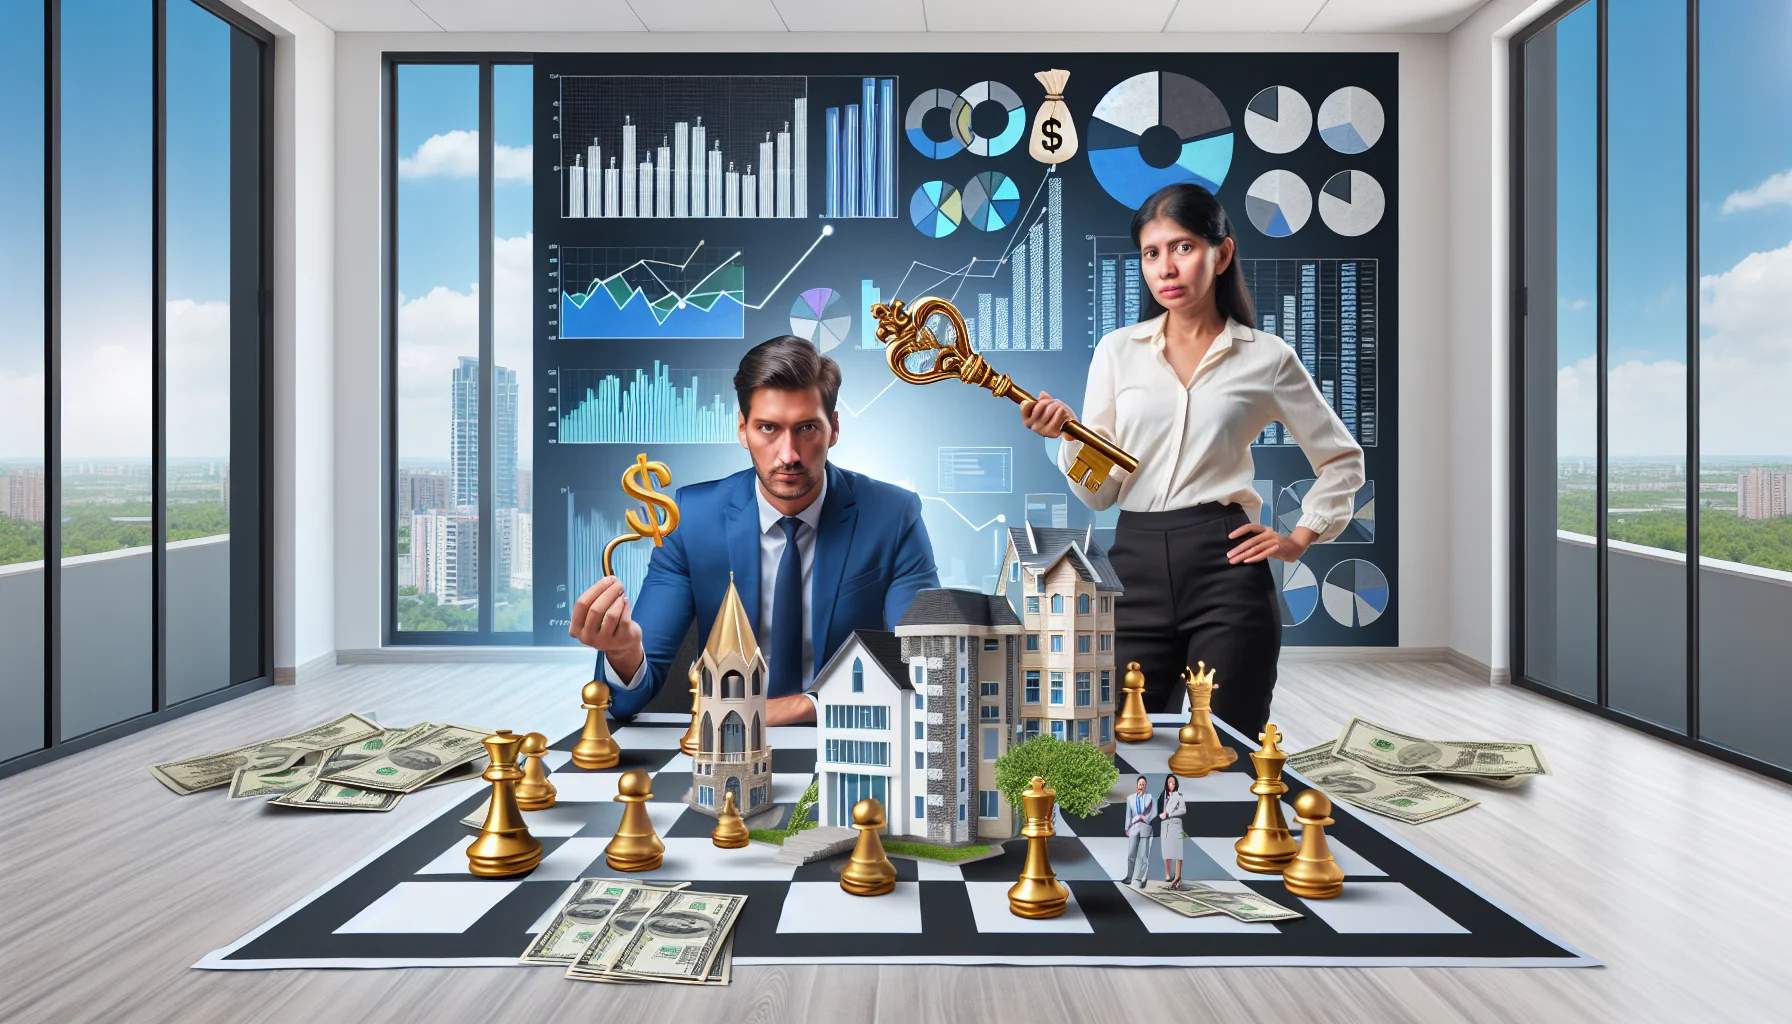 Create an amusing image depicting the ideal scenario for real estate strategies. Display a Caucasian male realtor and a South Asian female client in a brightly lit modern office, surrounded by graphs, charts and models of architectural buildings symbolizing the real estate market. Add some humorous elements like the realtor with a golden key in his hand, representing 'the perfect house', and a money tree in the backdrop symbolizing 'profitable investment'. Explicitly highlight the real estate strategies by depicting a giant chessboard on a table with models of houses and buildings as chess pieces.